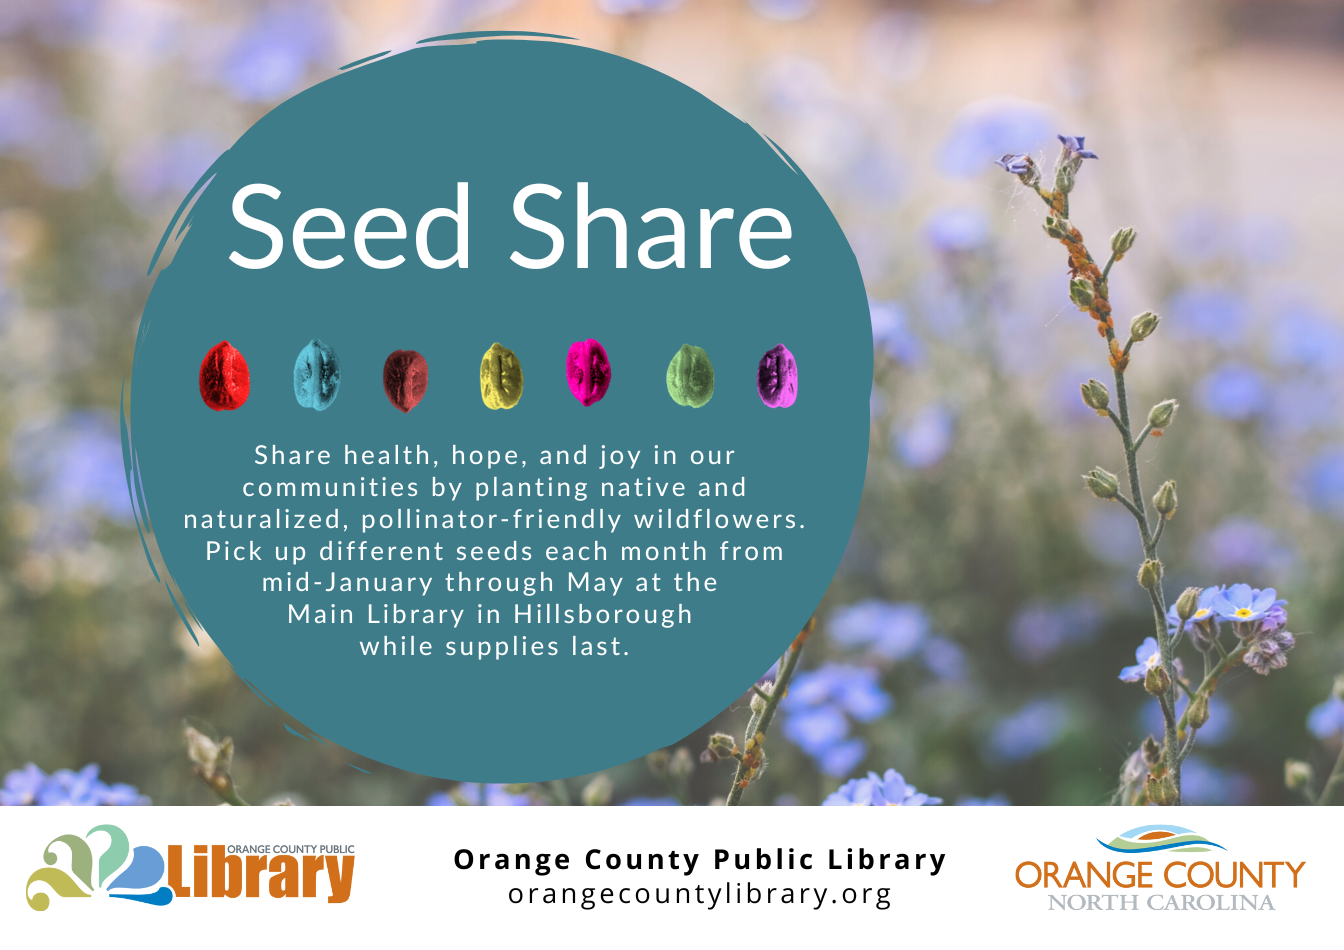 Share health, hope, and joy throughout our communities by planting pollinator-friendly wildflowers that are native or naturalized to our area. Seed packs with information and instructions will available on the 2nd floor of the Main Library in Hillsborough. A different plant will be featured each month from January through May. This month's plant seeds are: Lanceleaf Coreopsis (Coreopsis lanceolate). Seeds will be available all month while supply lasts.